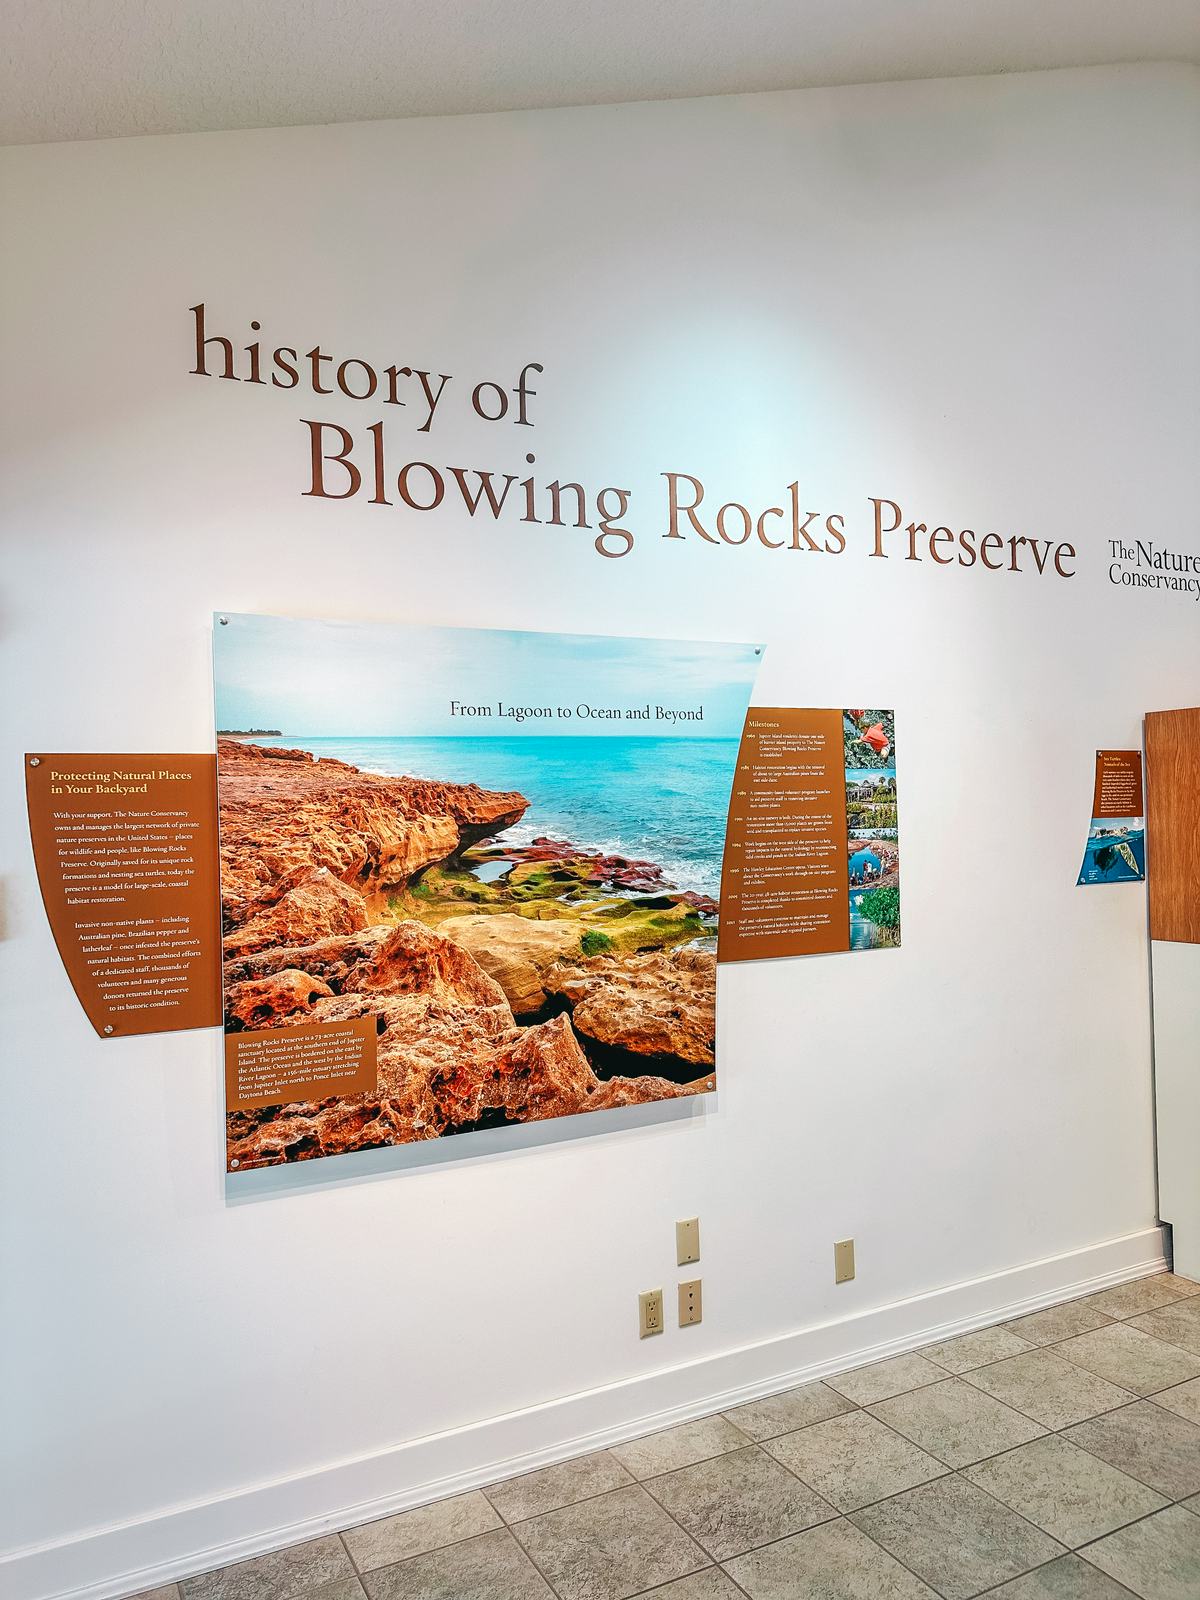 History of Blowing Rocks Preserve at the The Nature Conservatory in Jupiter Florida